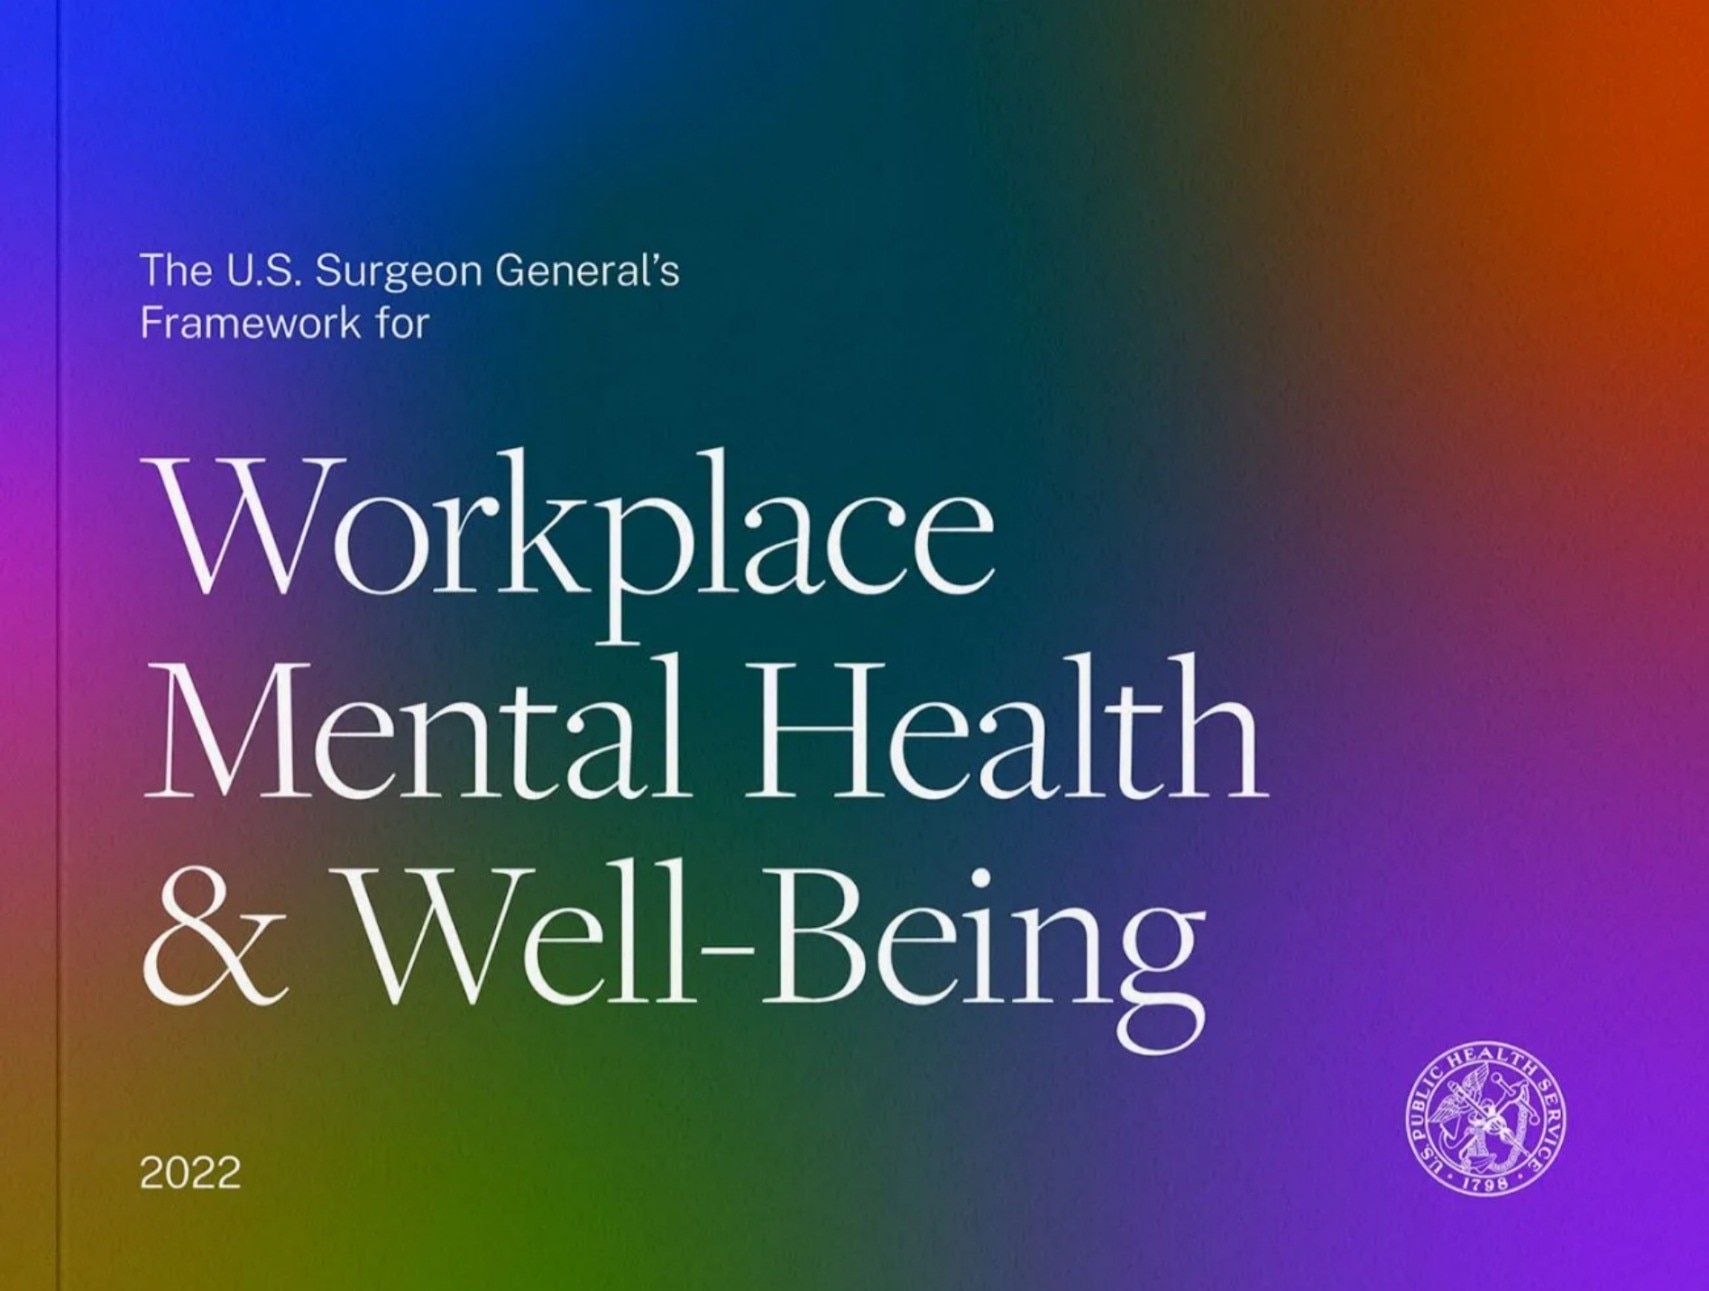 Cover image of the framework, The U.S. Surgeon General's Framework for Workplace Mental Health and Well-Being (2022)